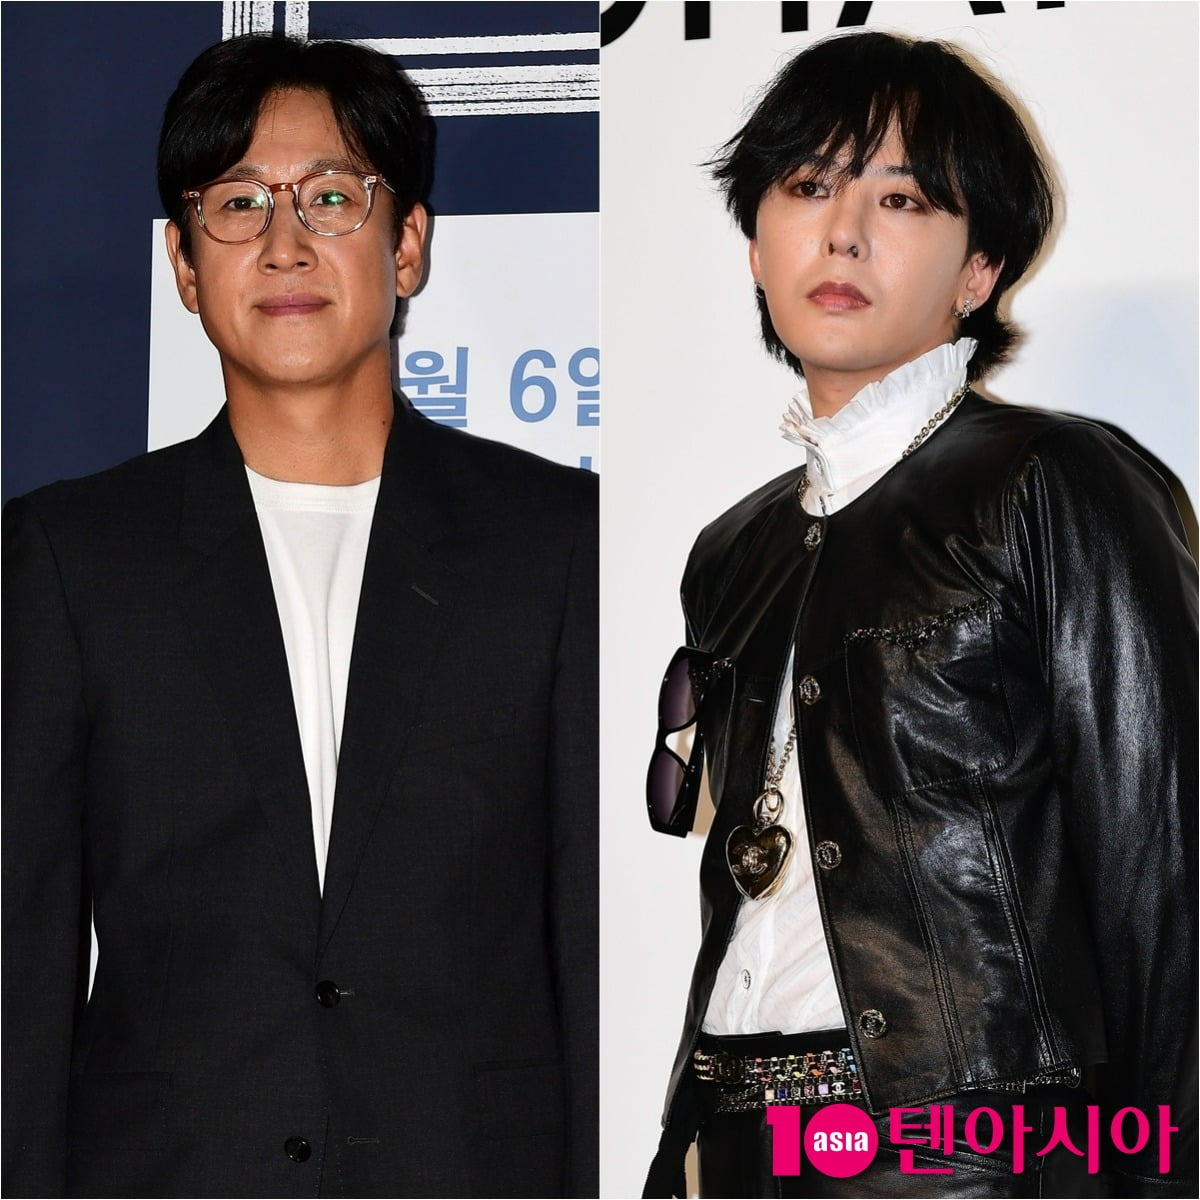 The doctor gave you free drugs? The entertainment establishment exposed by Lee Sun-kyun and GD was a hotbed of drug crime.